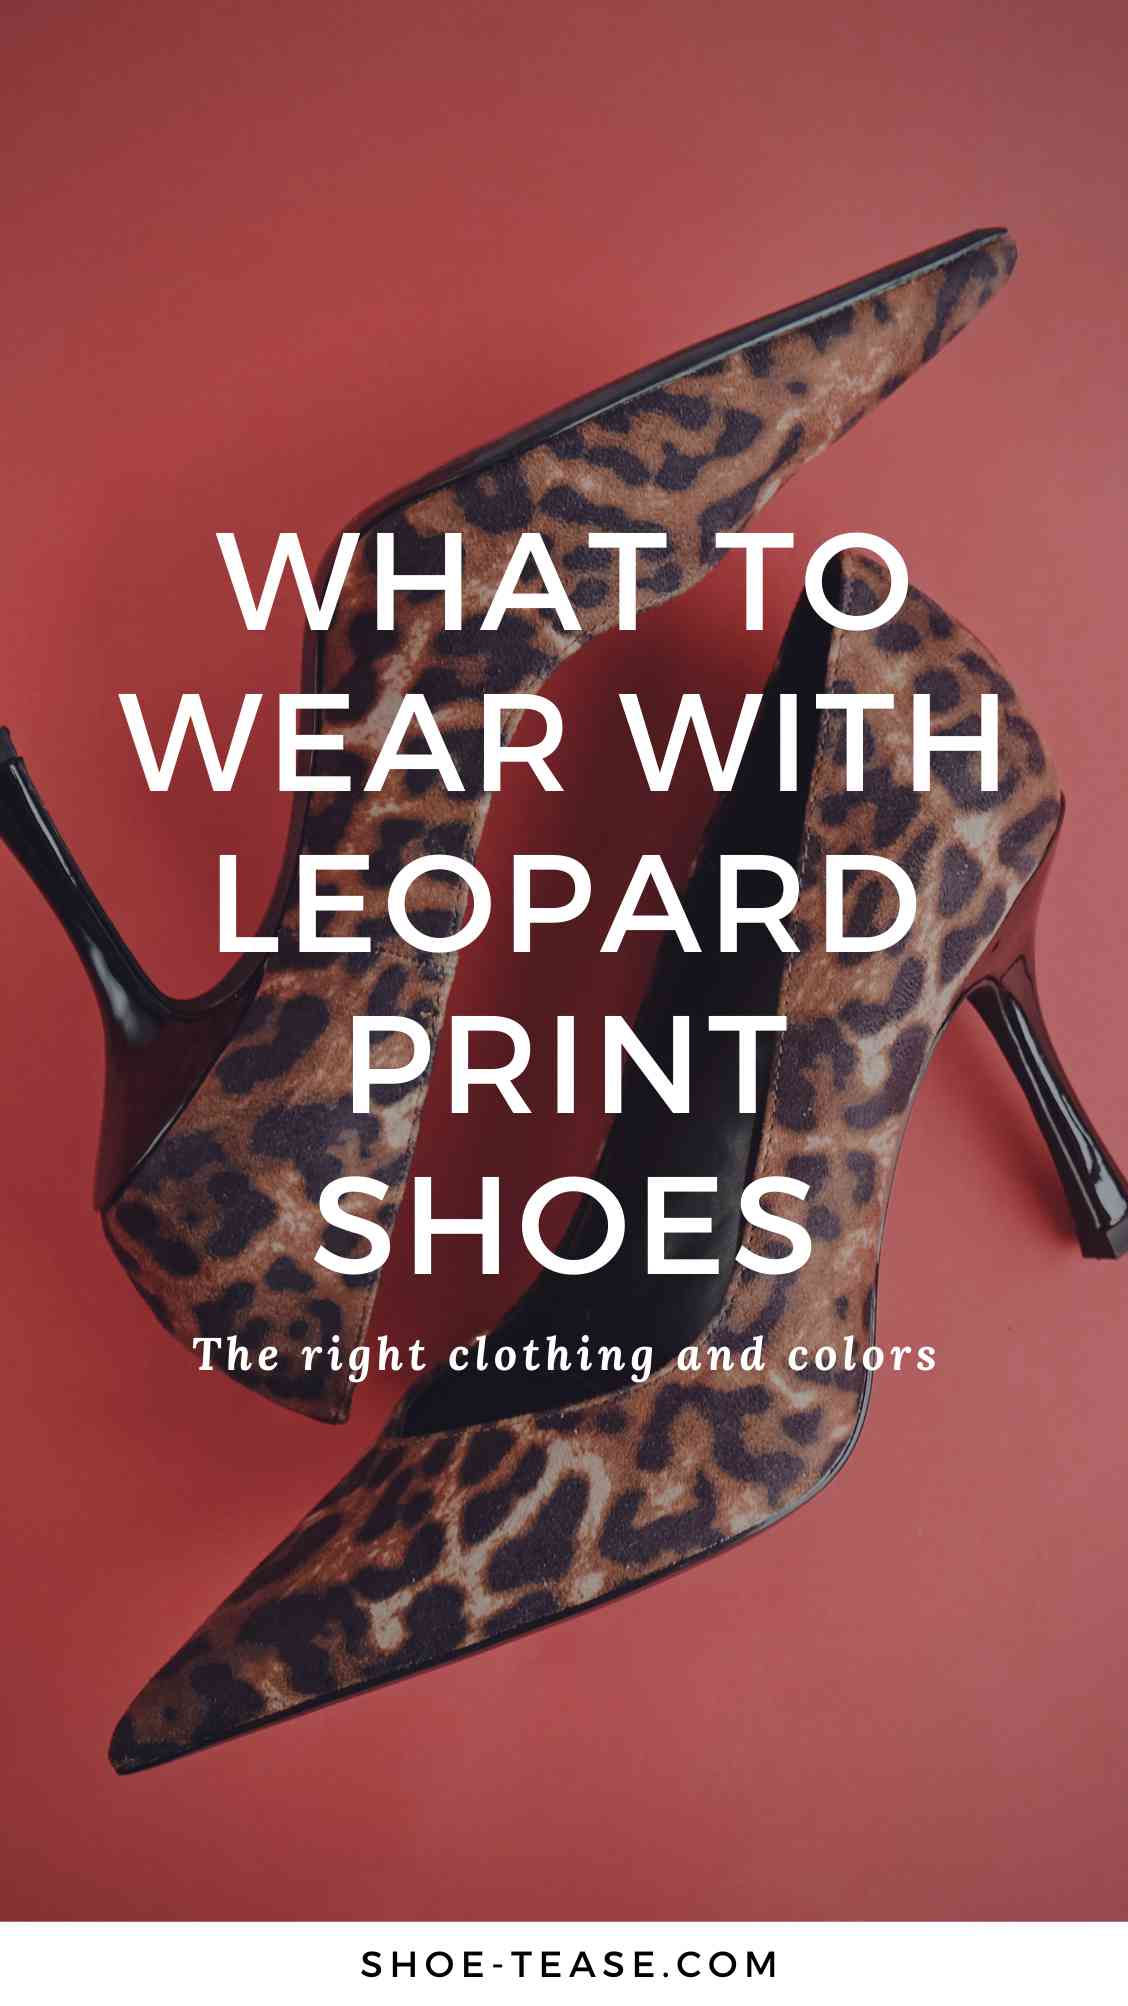 What to Wear with Leopard Print Shoes + Cheetah - 20 Great Outfit Ideas!